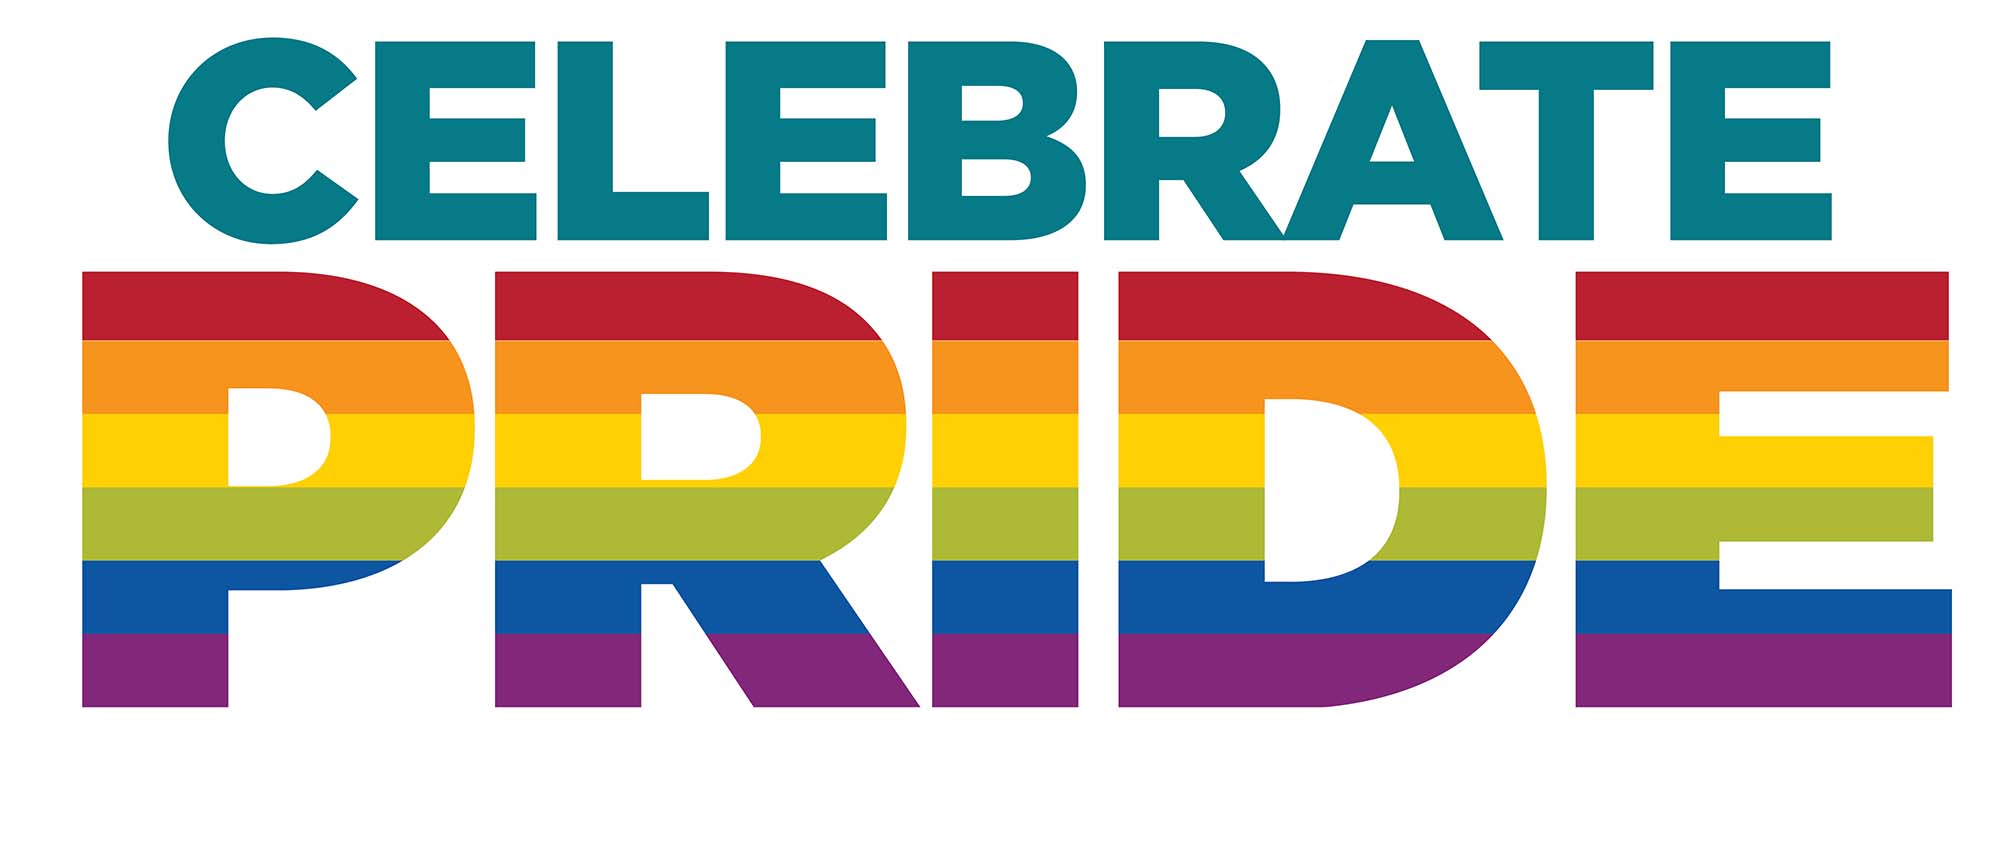 UNM graphic that says "Celebrate Pride" with pride colored as a rainbow